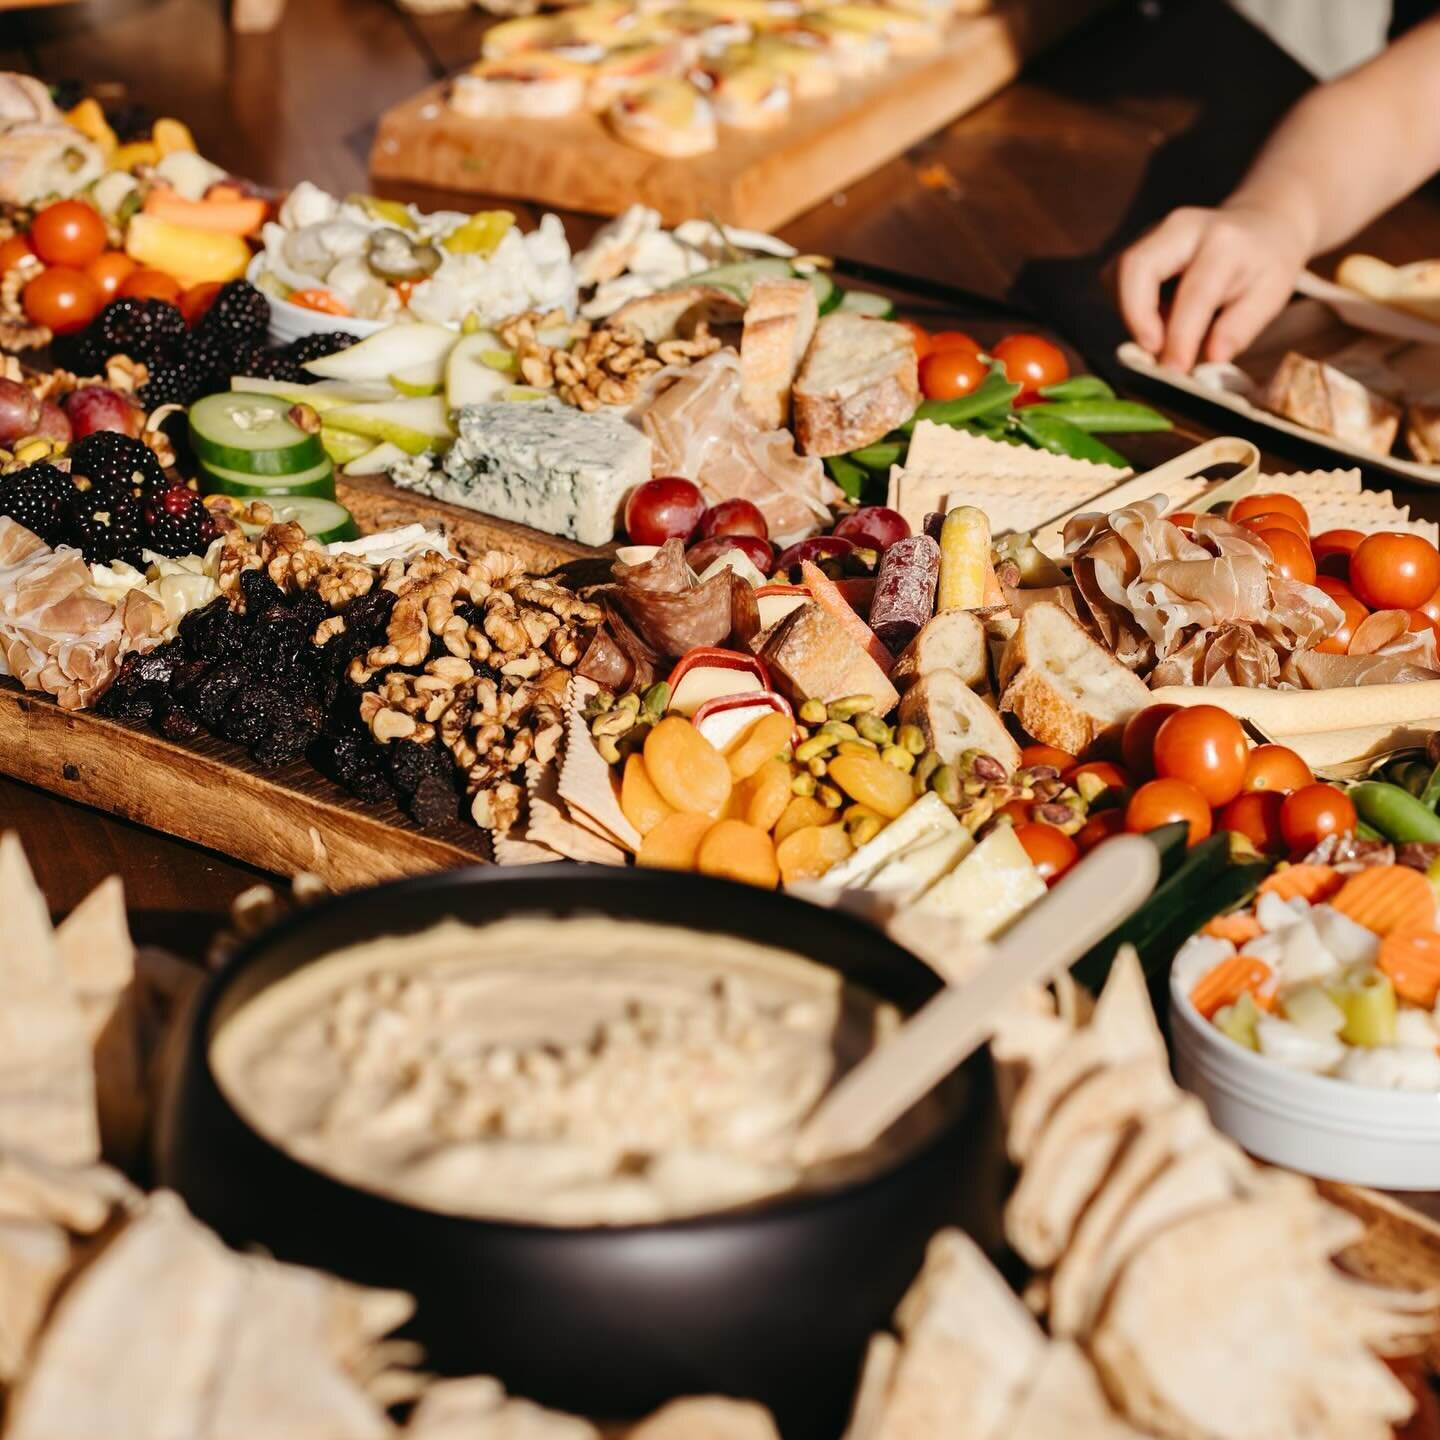 &ldquo;We wish this wedding had less charcuterie,&rdquo; said no wedding guest ever. 

📸 by @sammurchphotography

Couple: @kaylen_elizabeth @charlesmccash 
Venue: @topofthepines 
Beverage: @thethirstyrooster 
Dinner: @basickneadspizzaco 
Hors D&rsqu